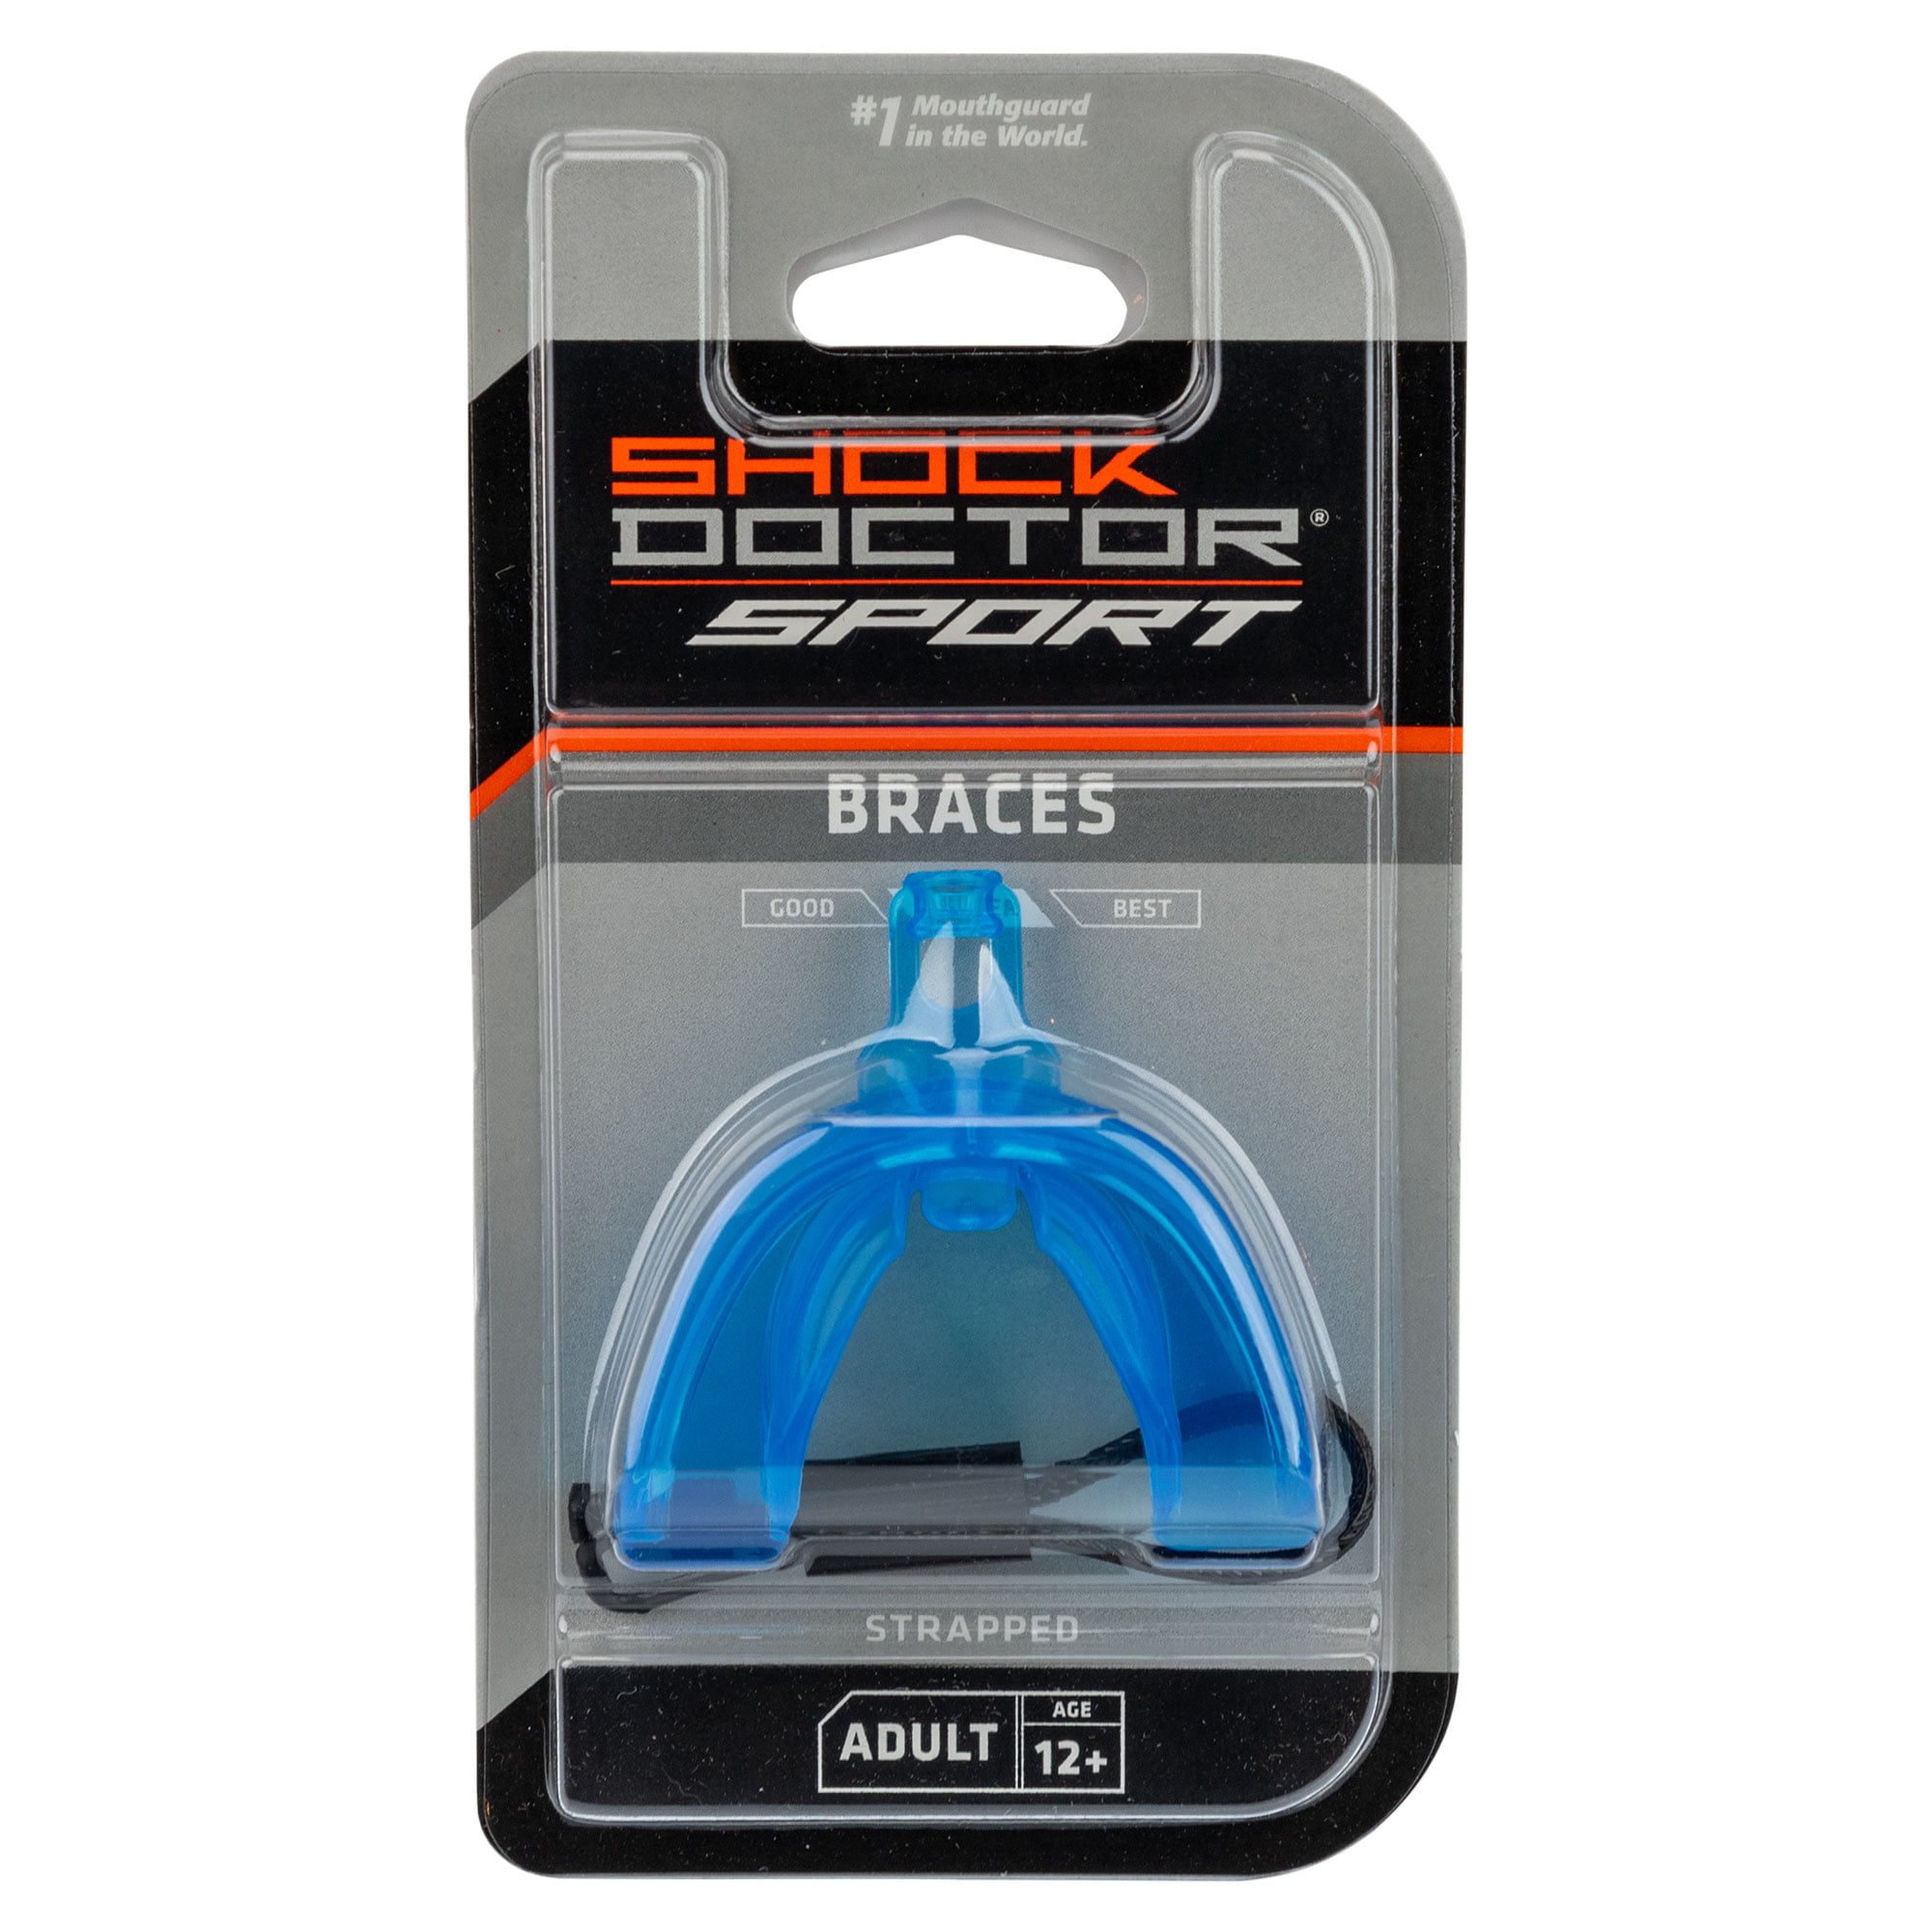 Protect Your Teeth & BRACES While Playing Sports Youth & Adult Sizes Shock Doctor Mouth Guard for Braces 